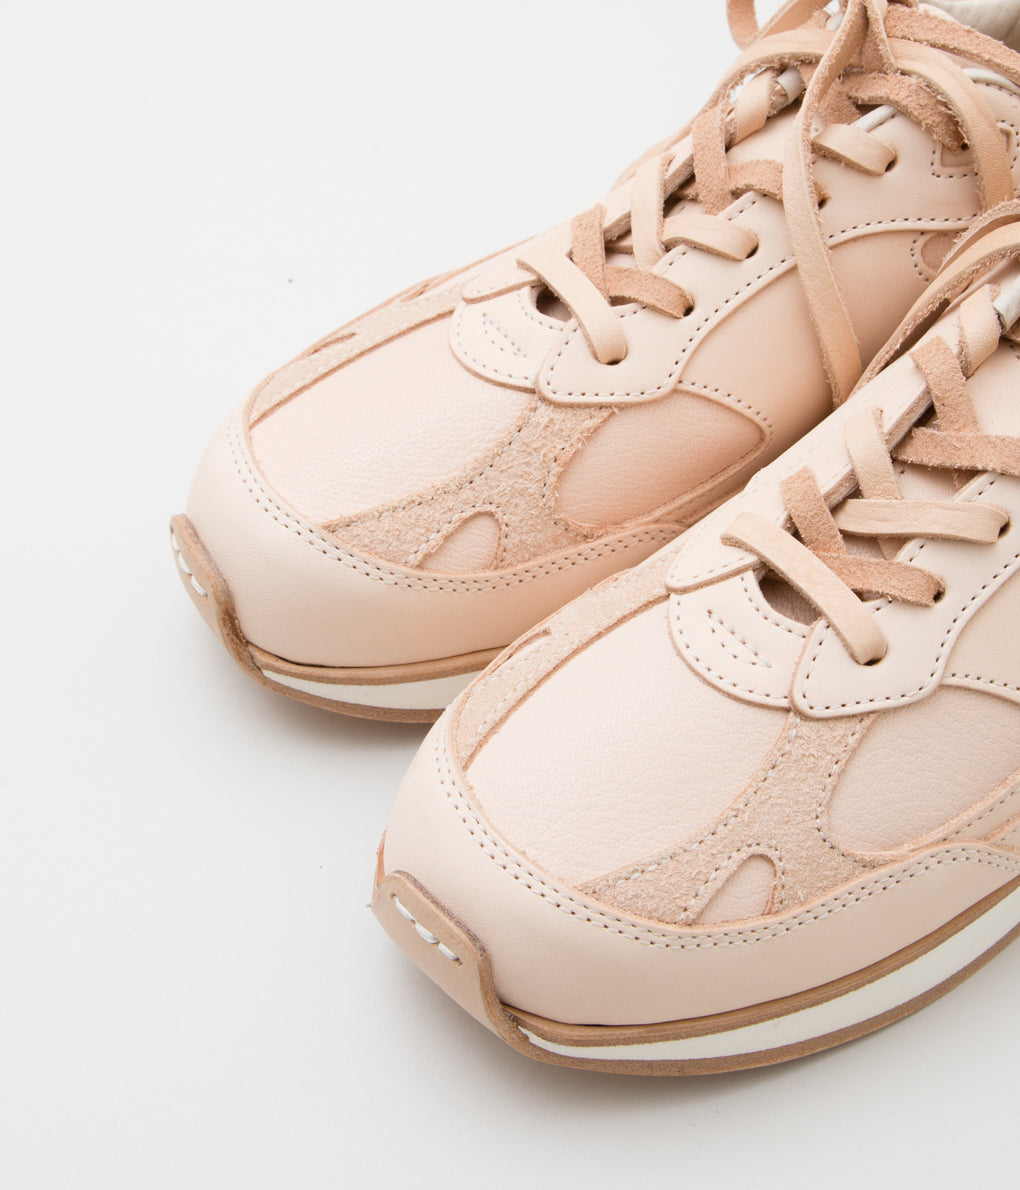 HENDER SCHEME "manual industrial products 28" (NATURAL)